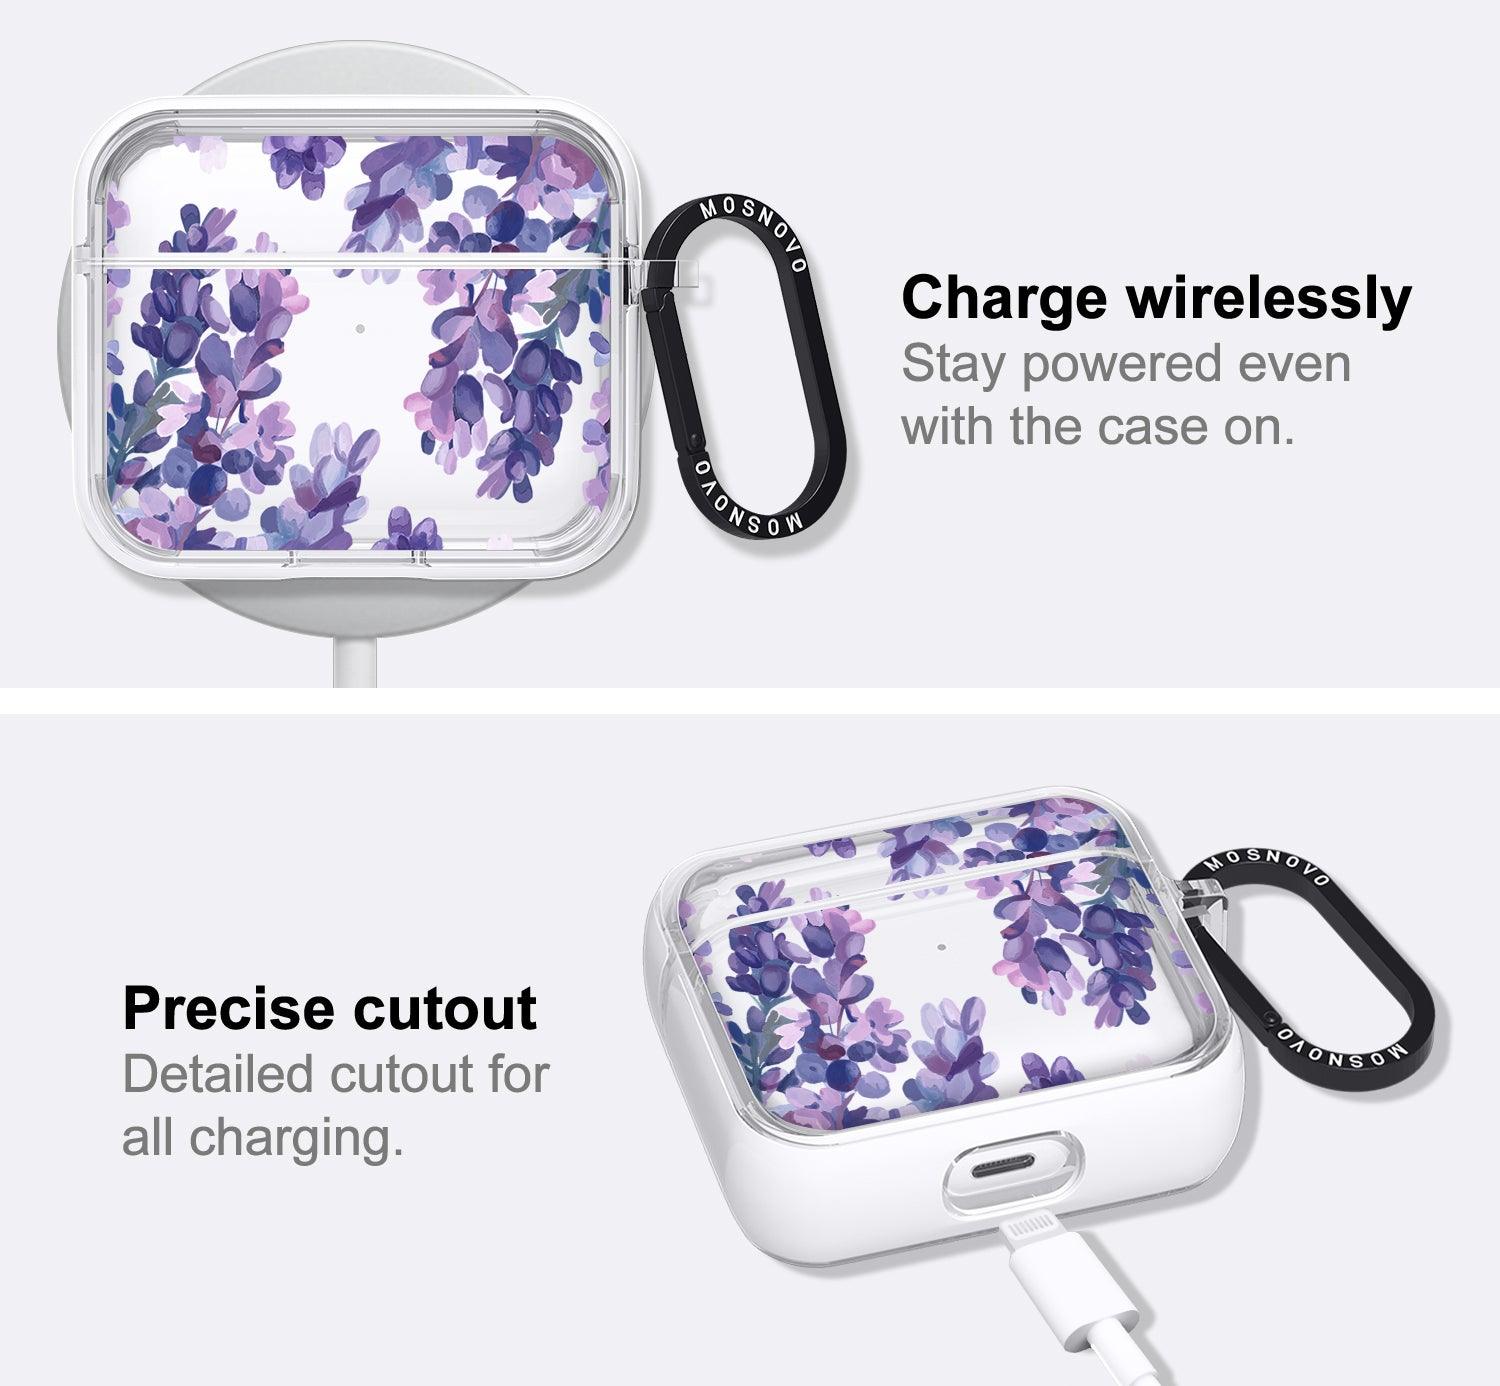 Lavender Floral flower AirPods 3 Case (3rd Generation) - MOSNOVO